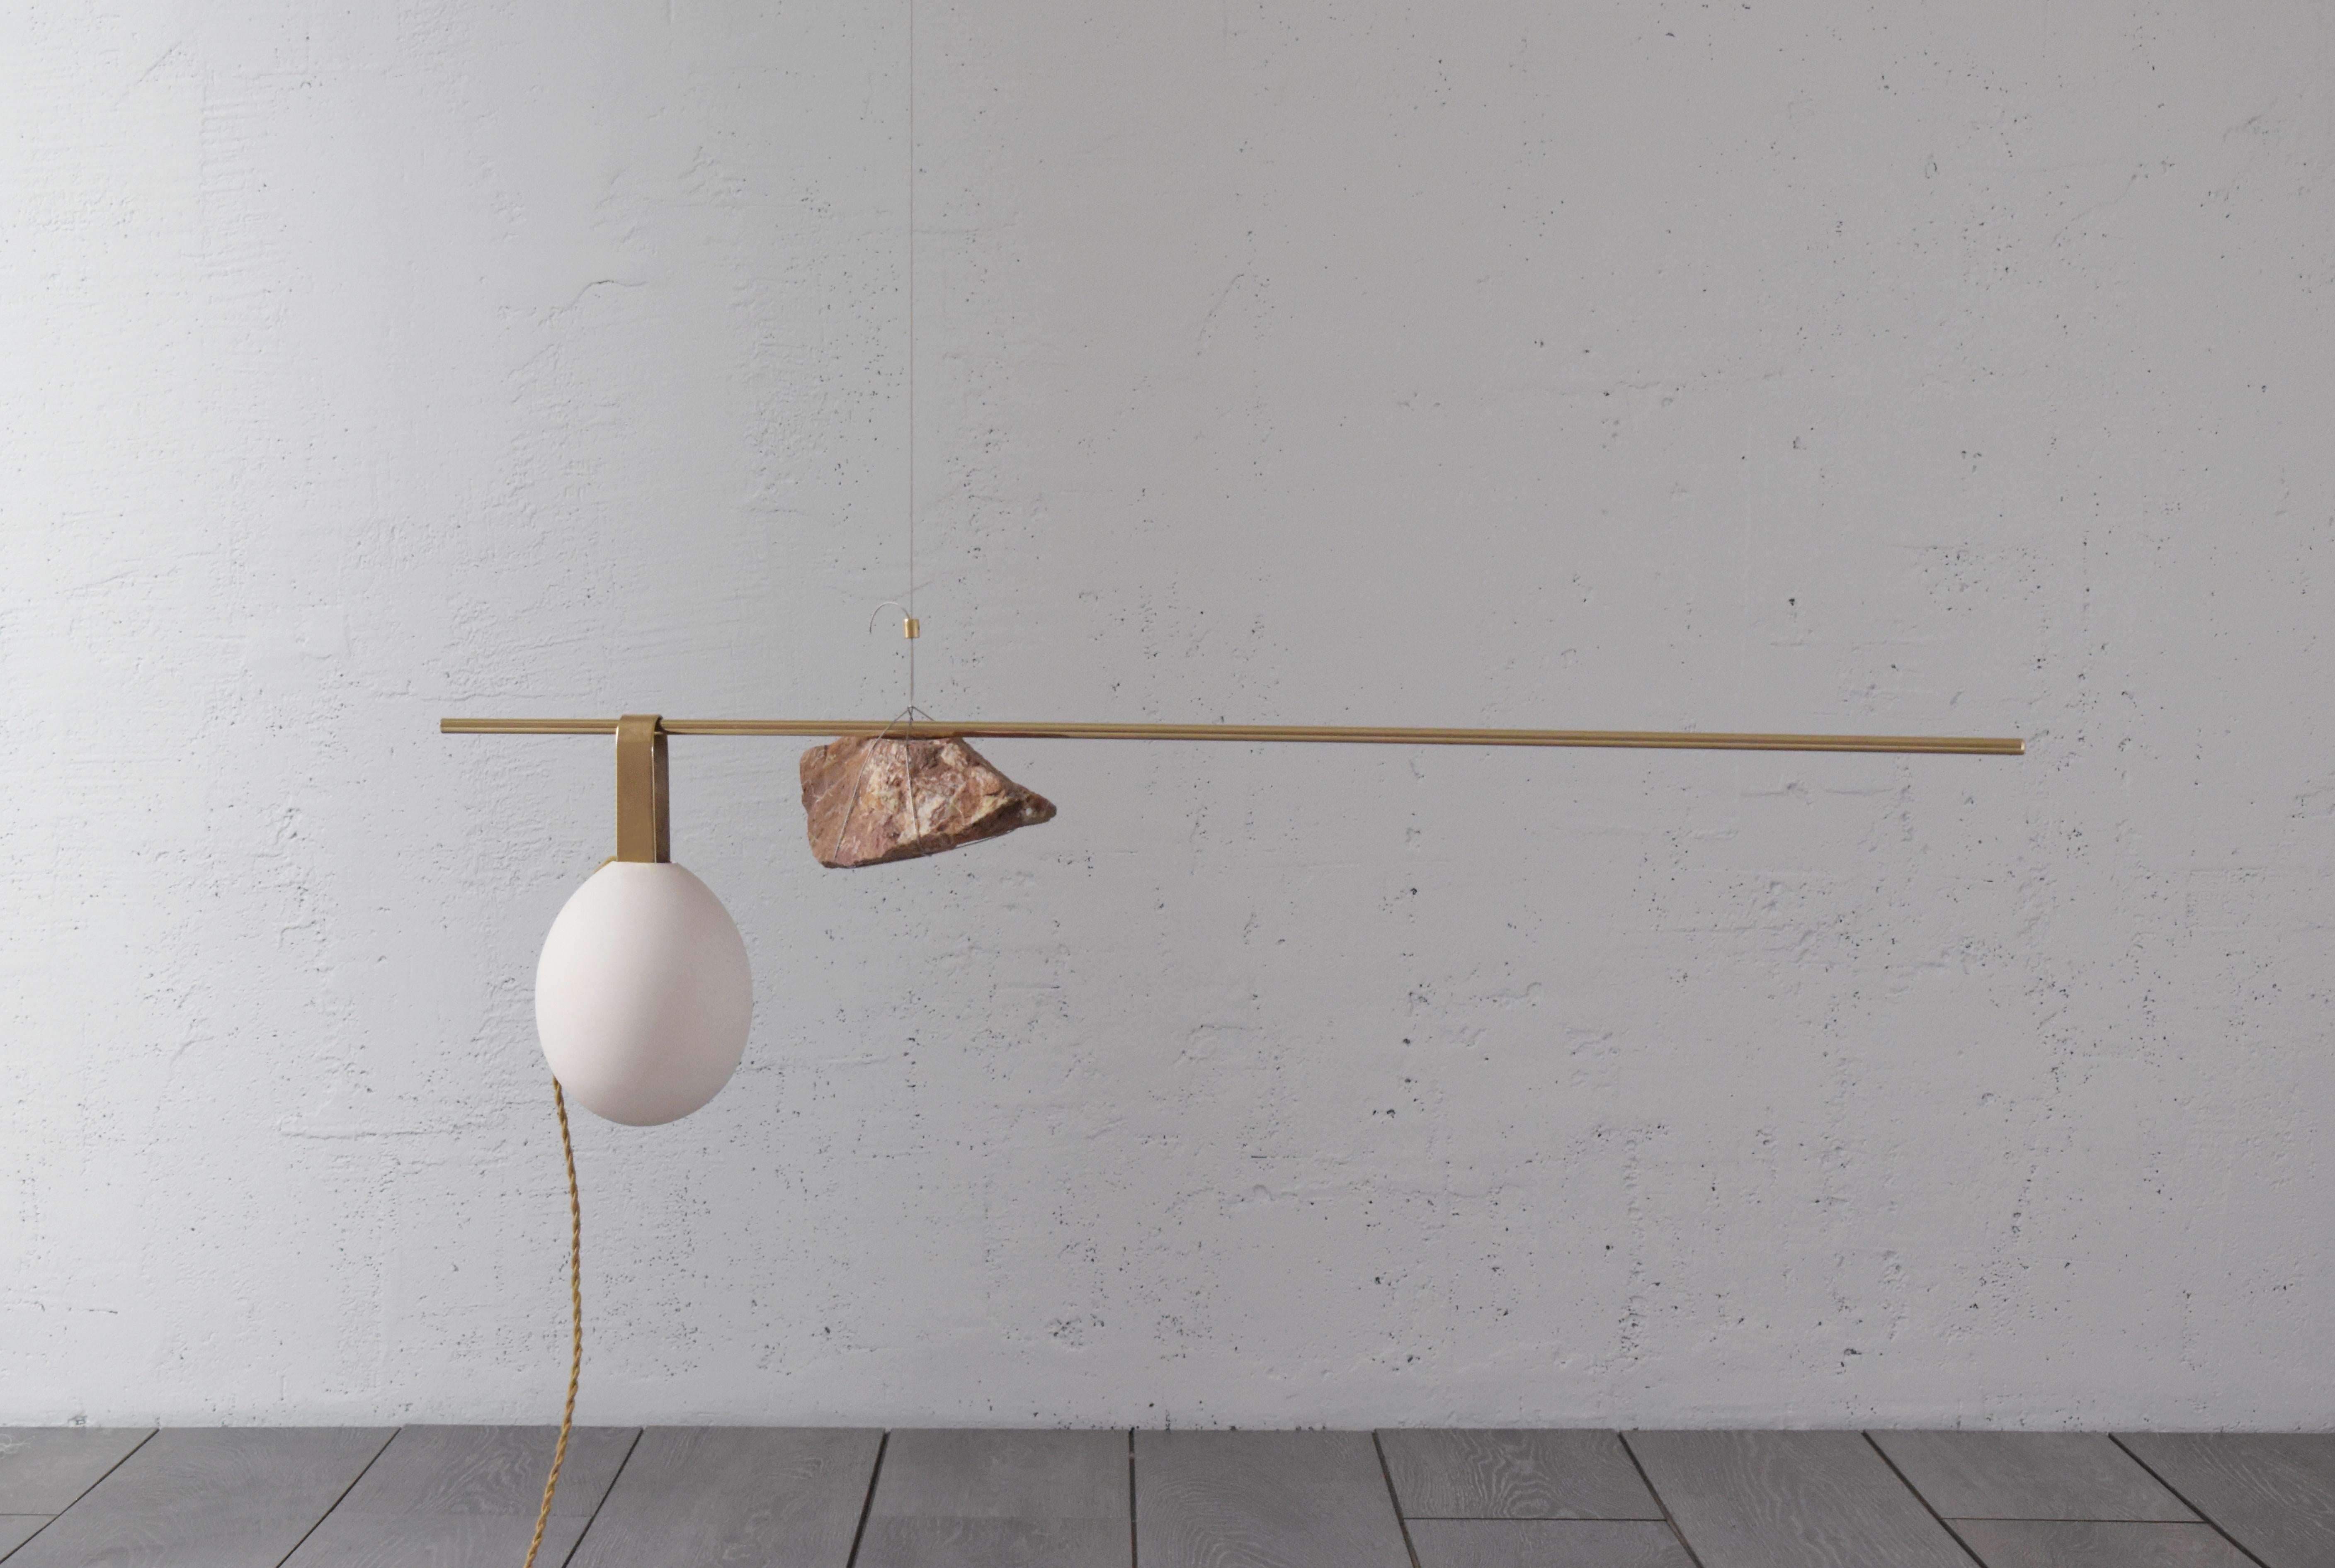 Sculpted lighting hatching eggs no 3 by Periclis Frementitis
Signed by Periclis Frementitis
Studio: HIGHDOTS
Dimensions: D 15 x W 110 x H 35 cm
Materials: Brass, raw stone, porcelain, G4 LED bulb.


Total drop length: customizable. please